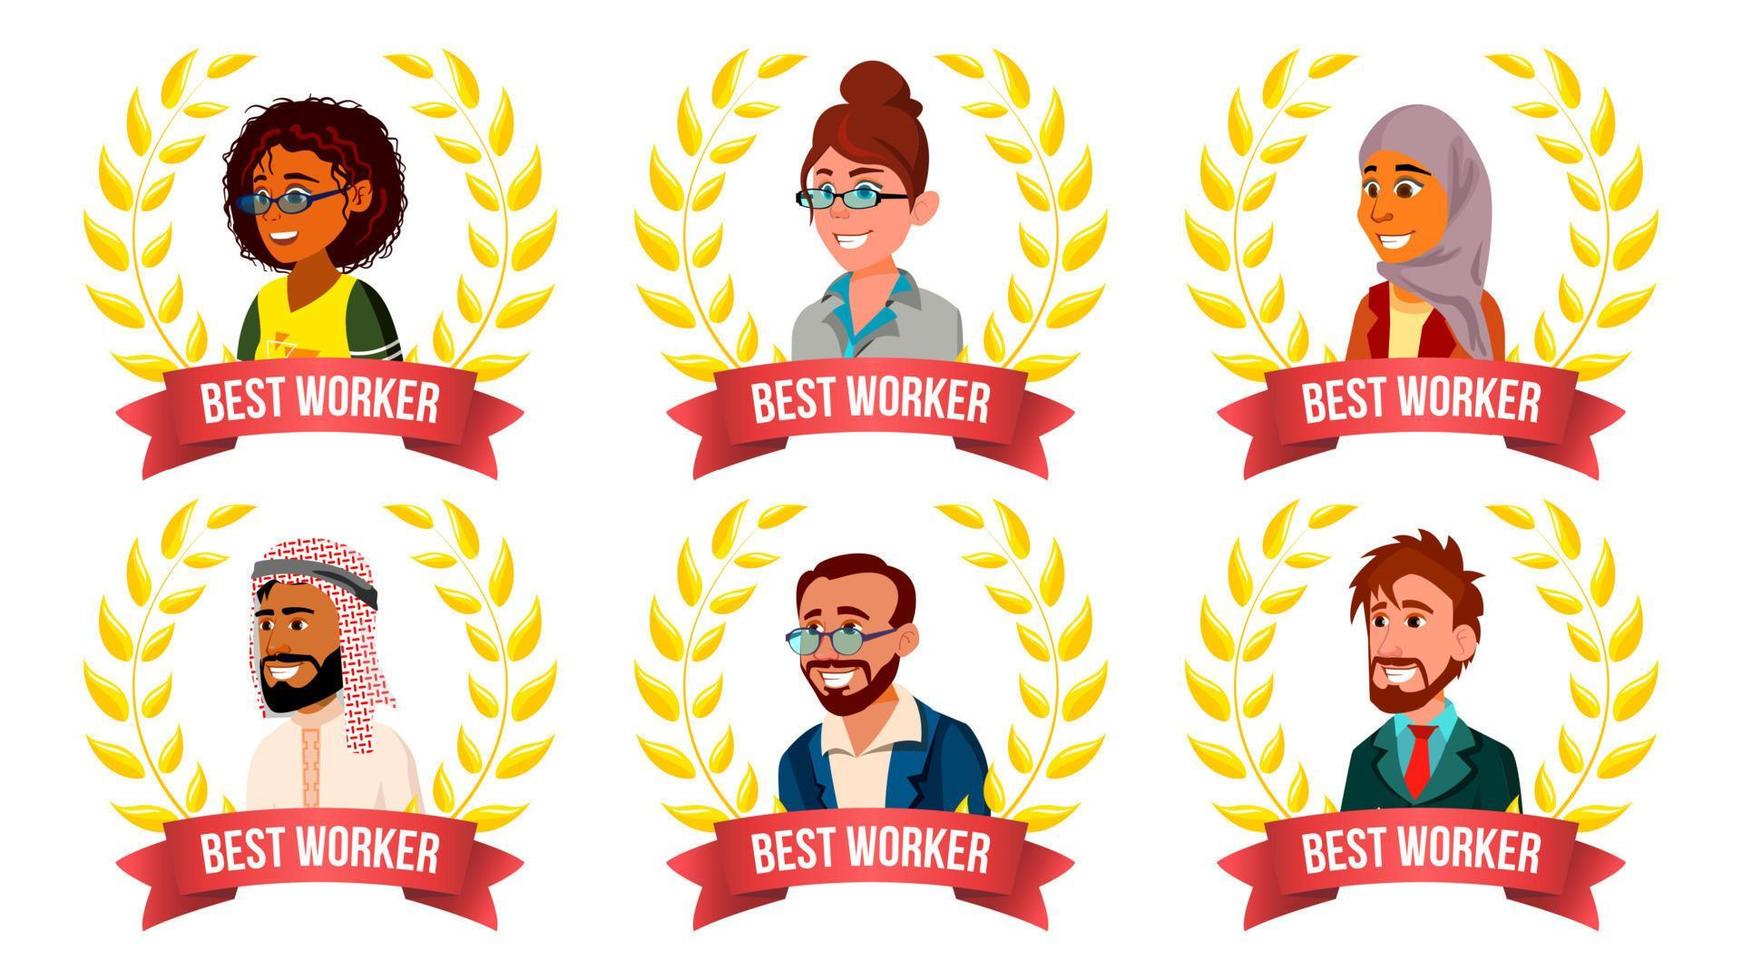 Best Worker Employee Set Vector. Man, Woman. Arab, Turkish, European, Afro American. Award Of The Year. Gold Wreath. The Most Great Results. Smiling. Leader Business Cartoon Illustration vector